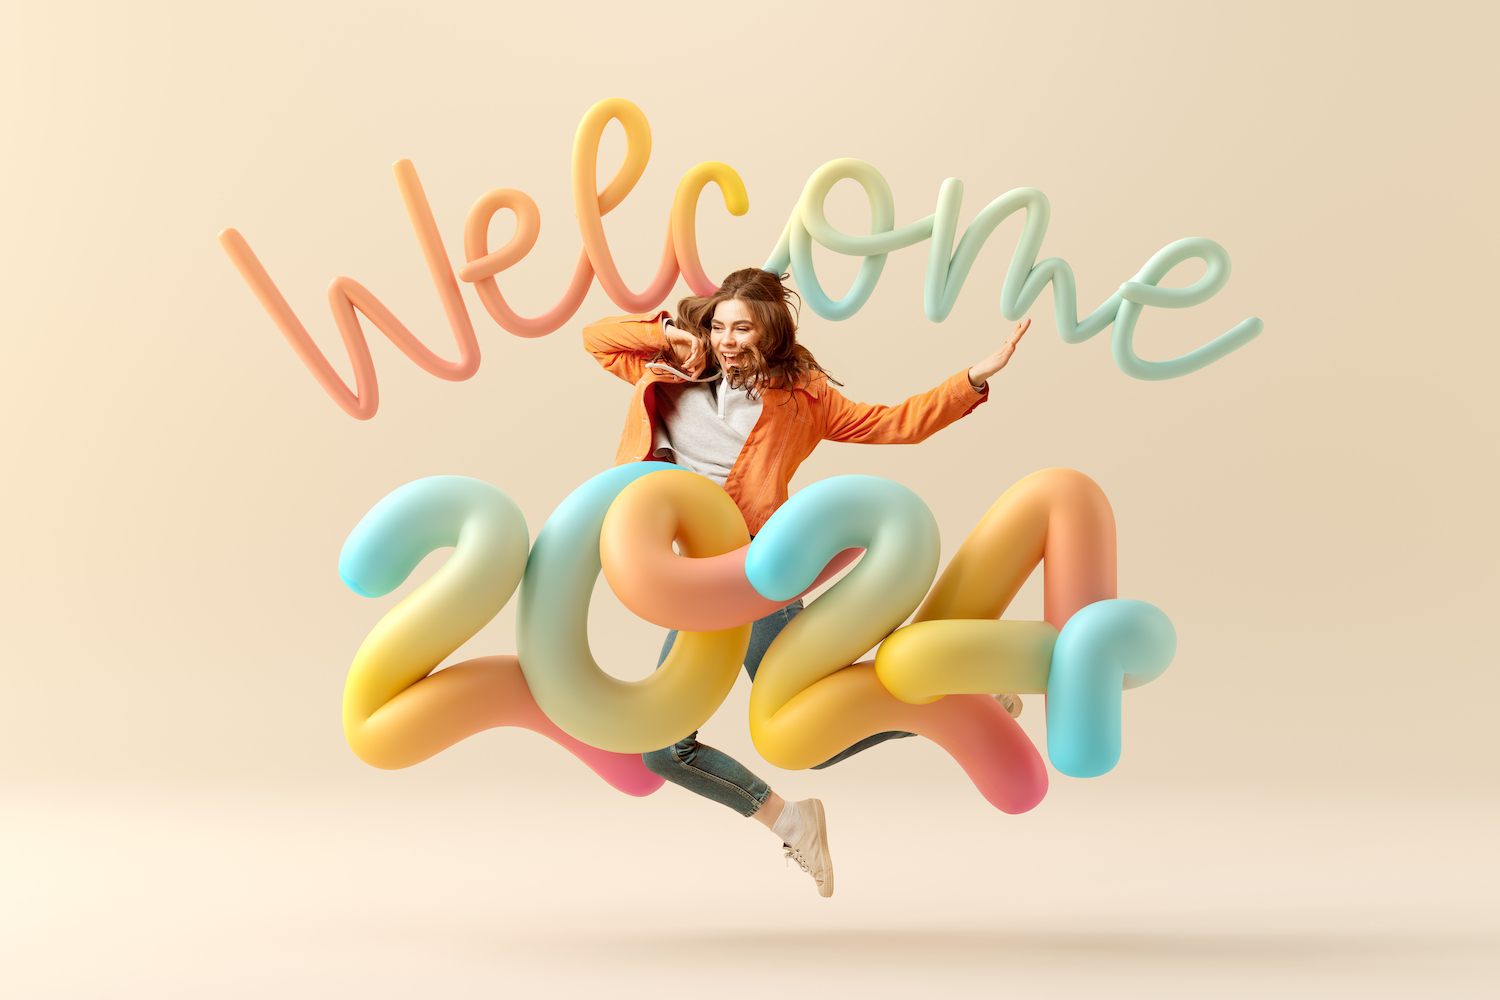 oral health goals, 2024, new years resolution, new year resolution, healthy smile, image of smiling, jumping woman in a welcome to 2024 display